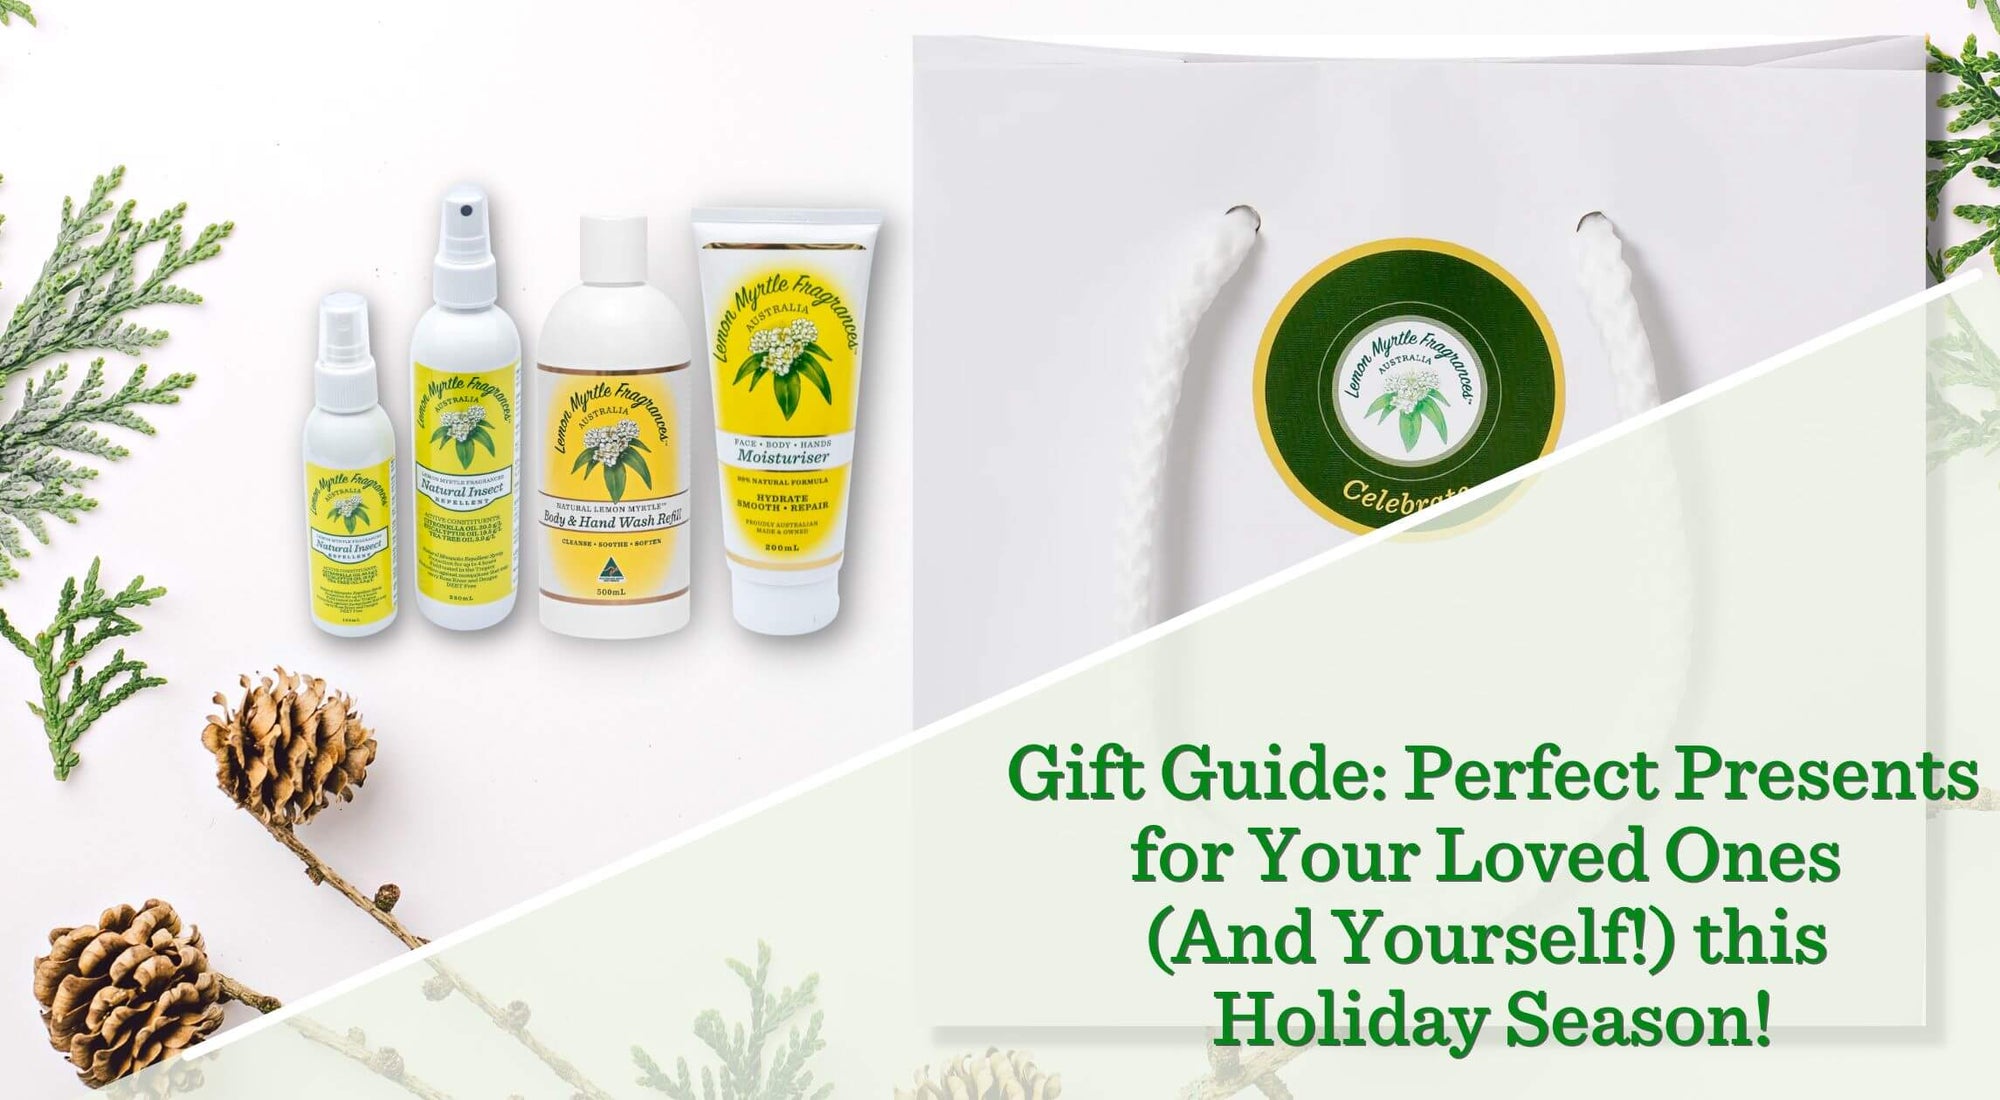 Gift Guide: Perfect Presents for Your Loved Ones (And Yourself!) this Holiday Season!